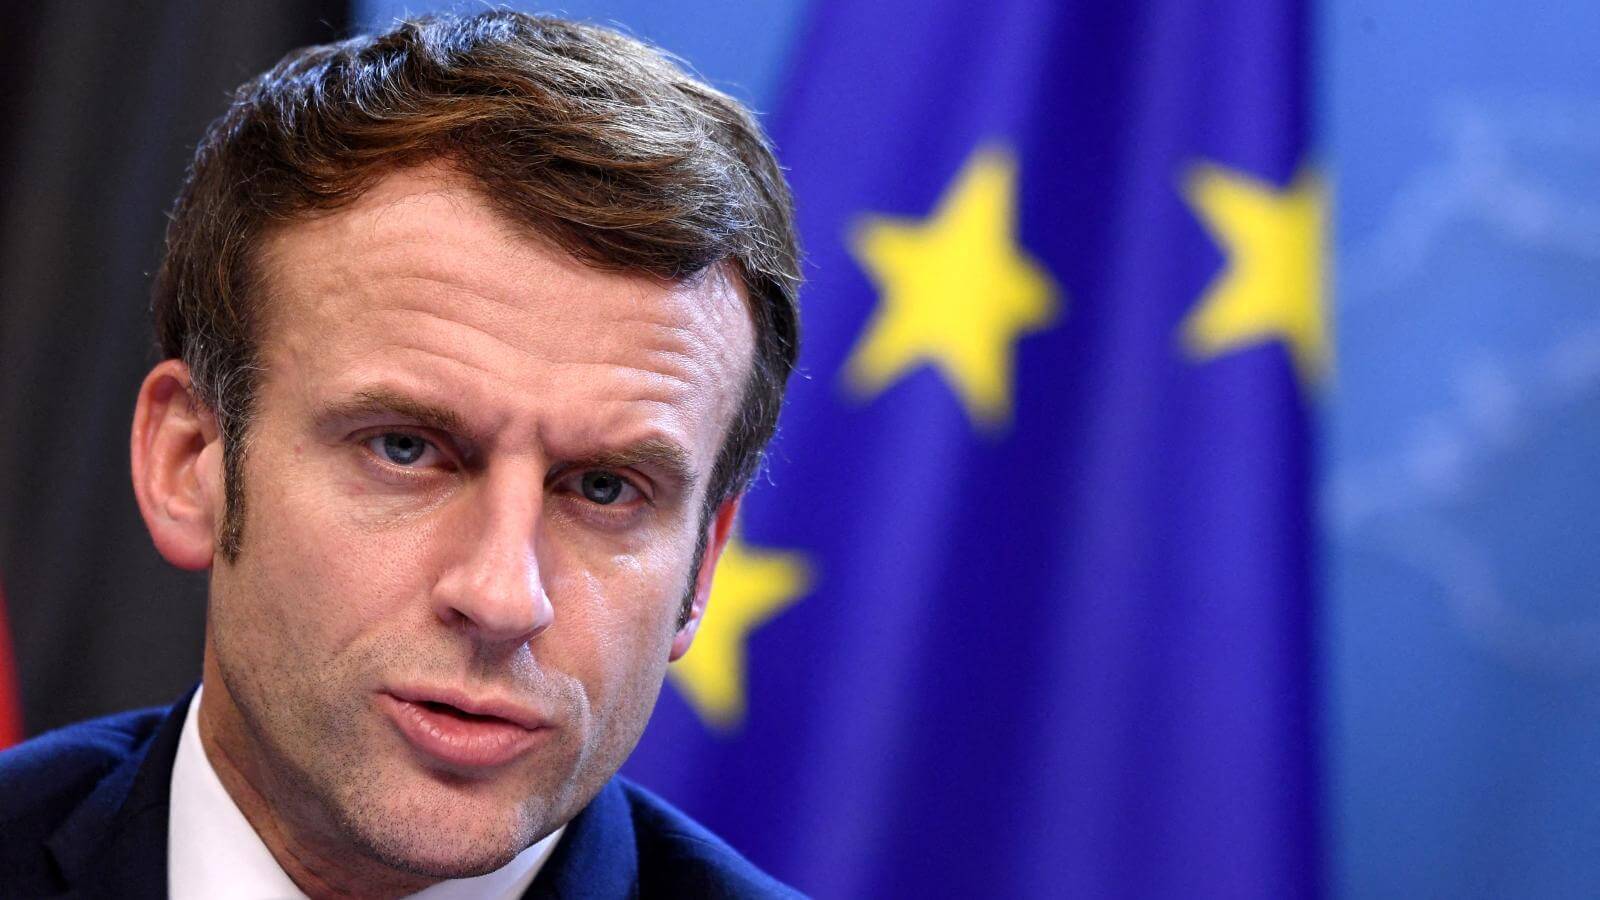 Macron Urges Greater Focus on Climate, Security & Tech As France Begins EU Presidency